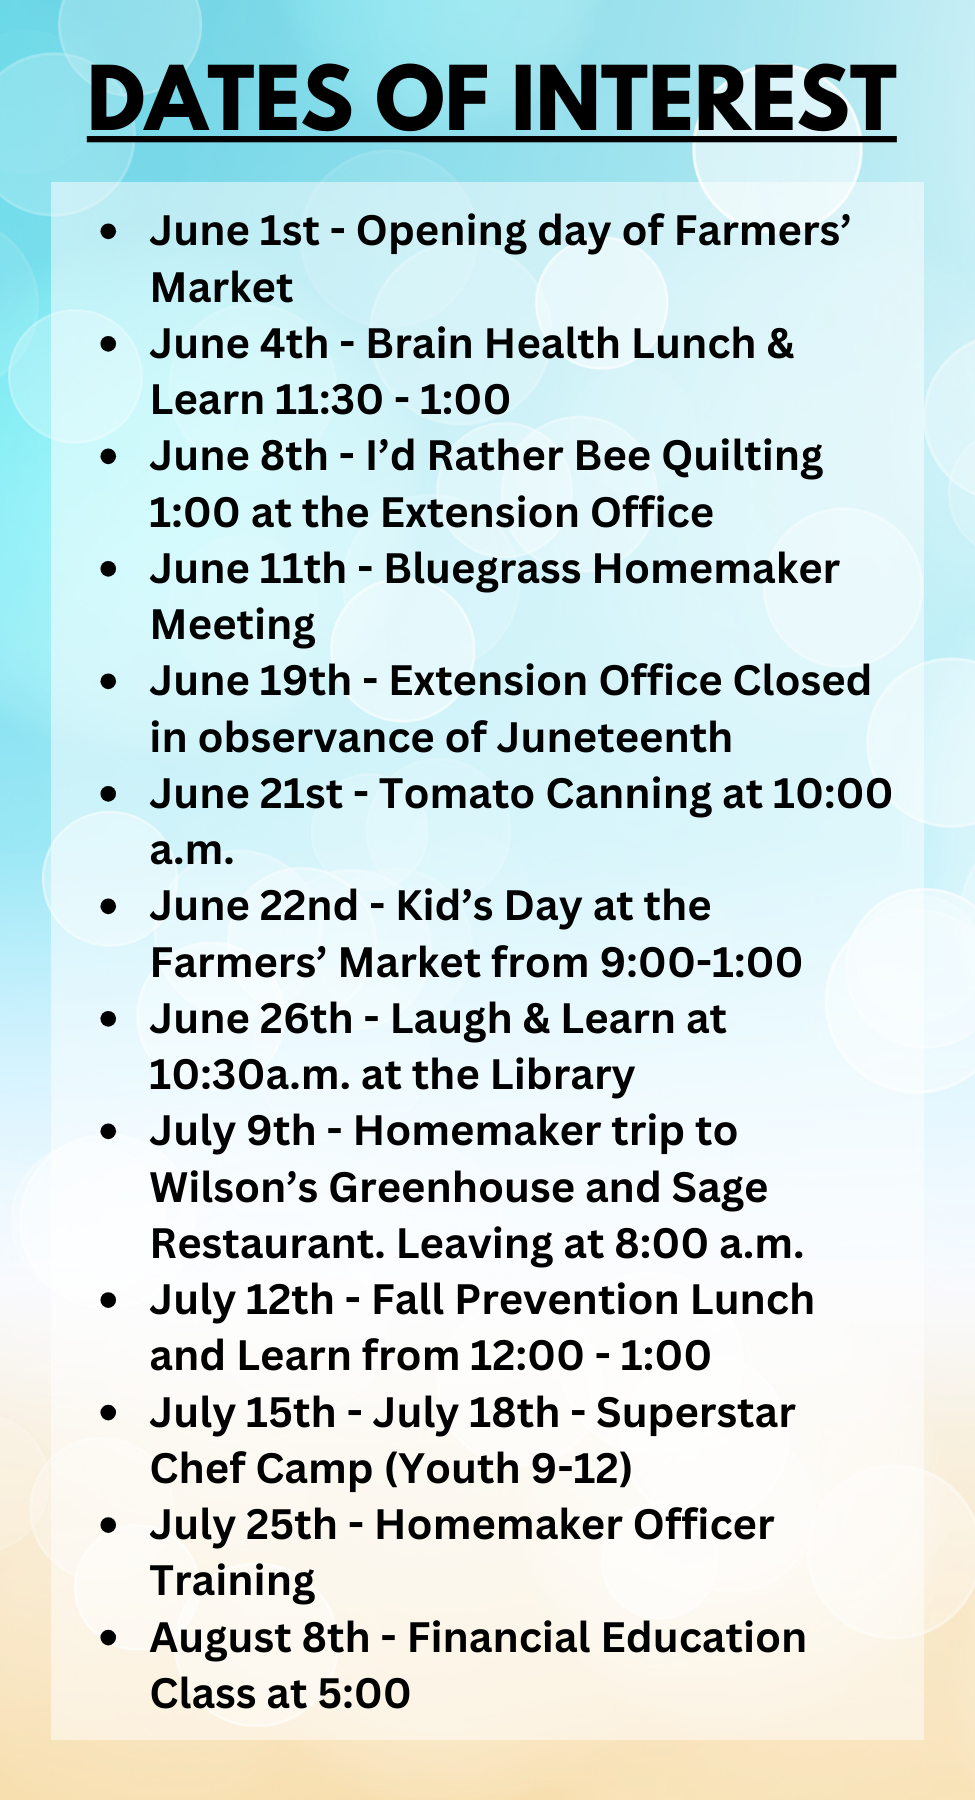 Dates to remember for June through August for Estill FCS